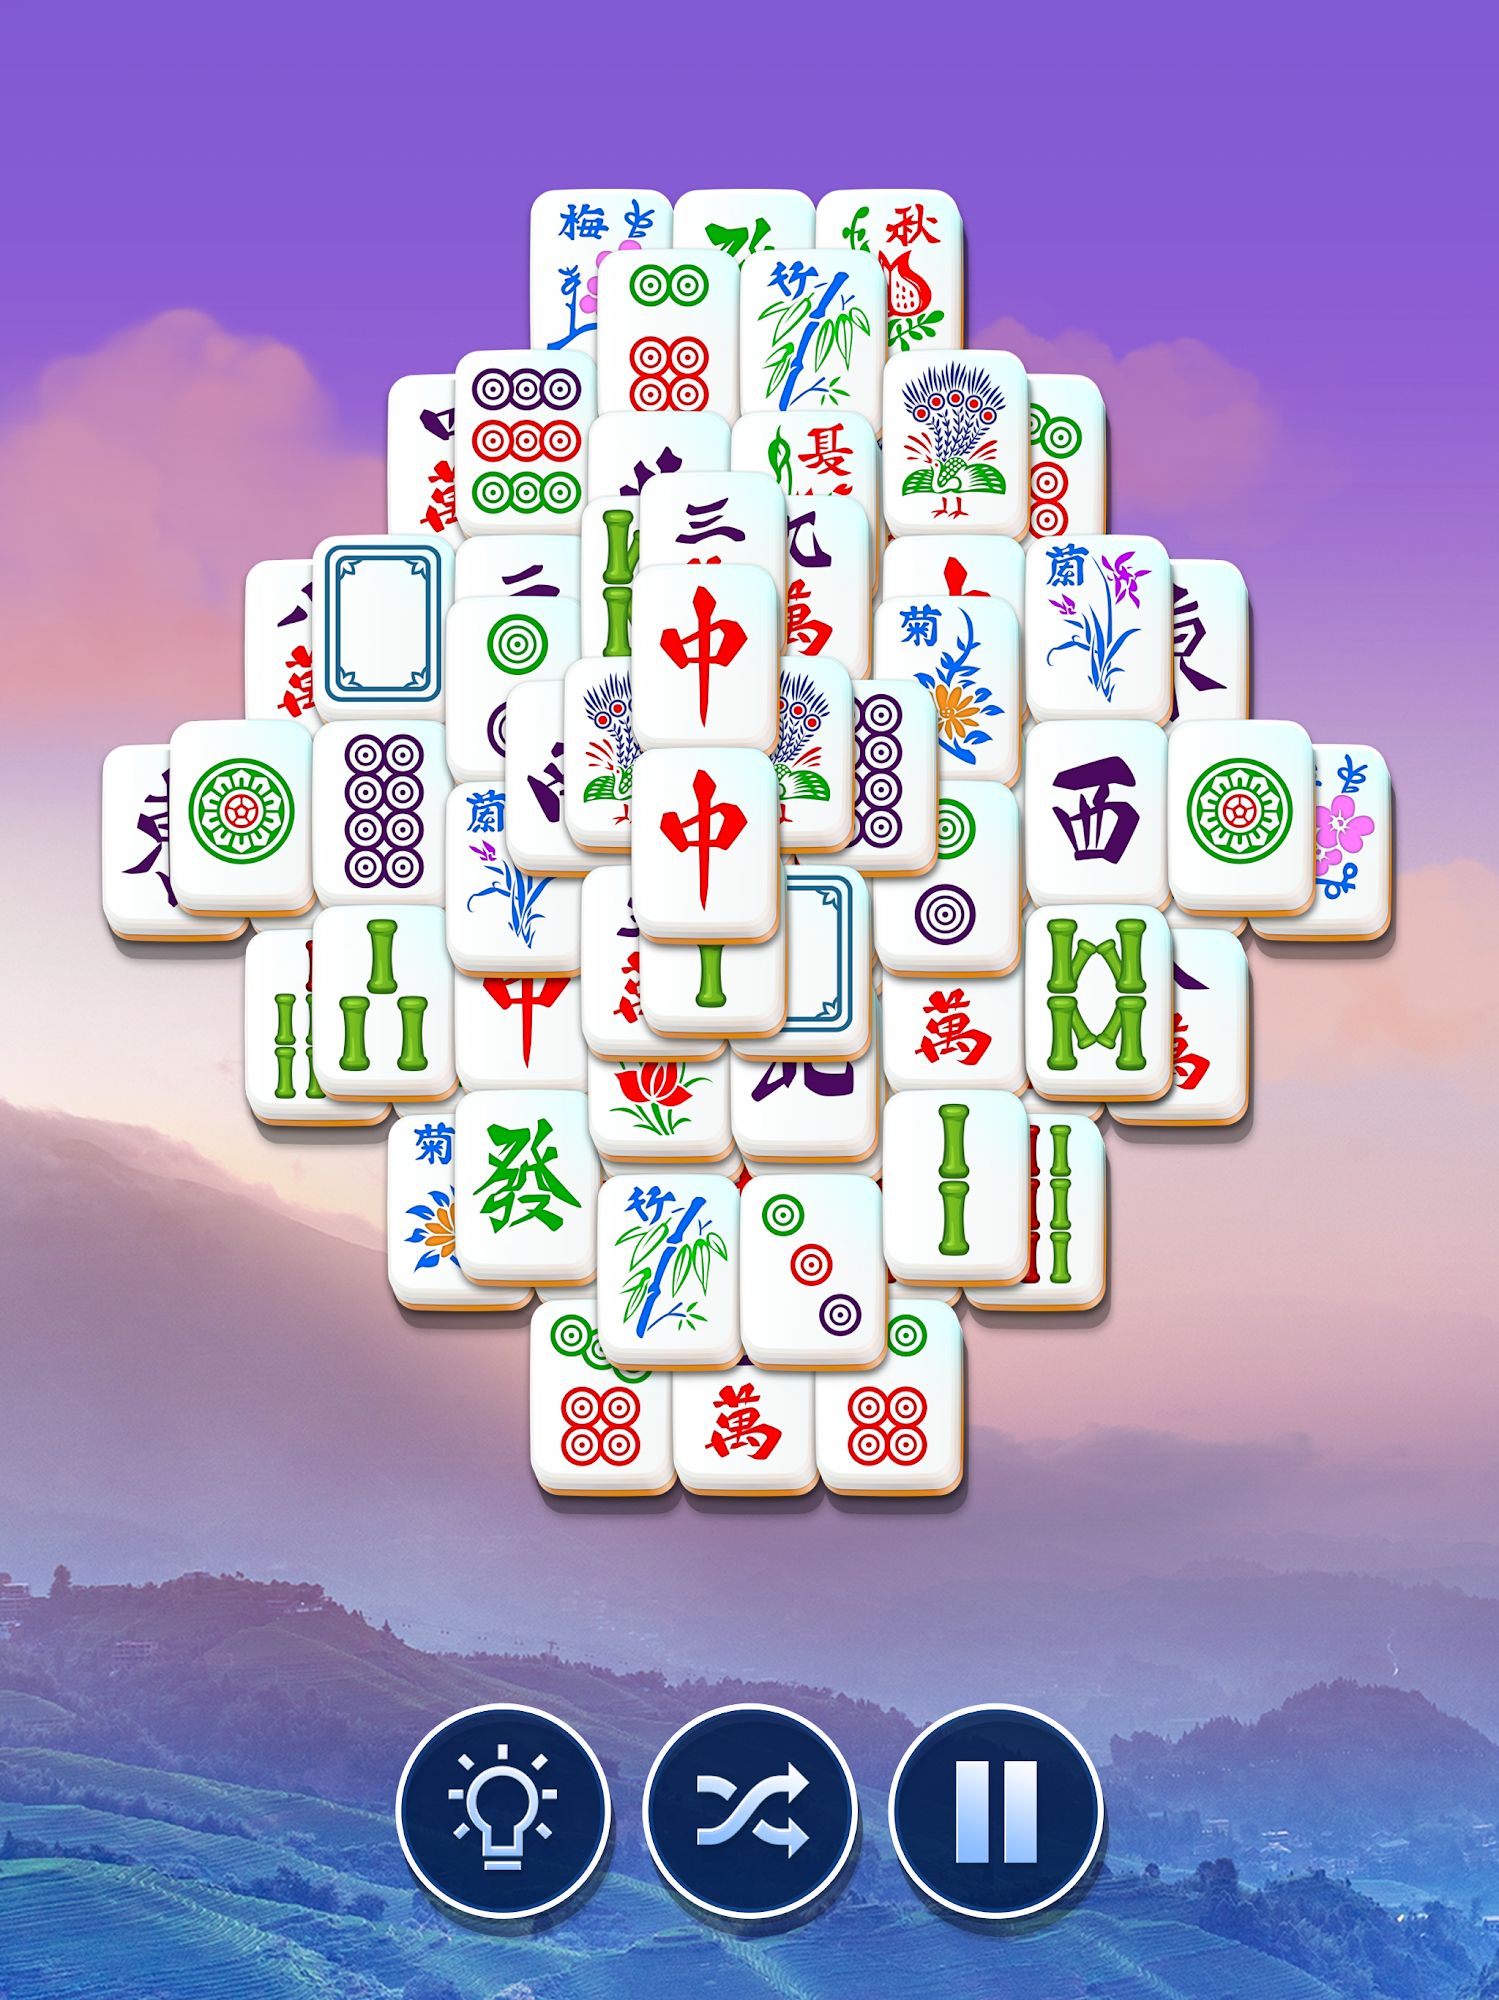 Download Mahjong Club - Solitaire Game für Android kostenlos.